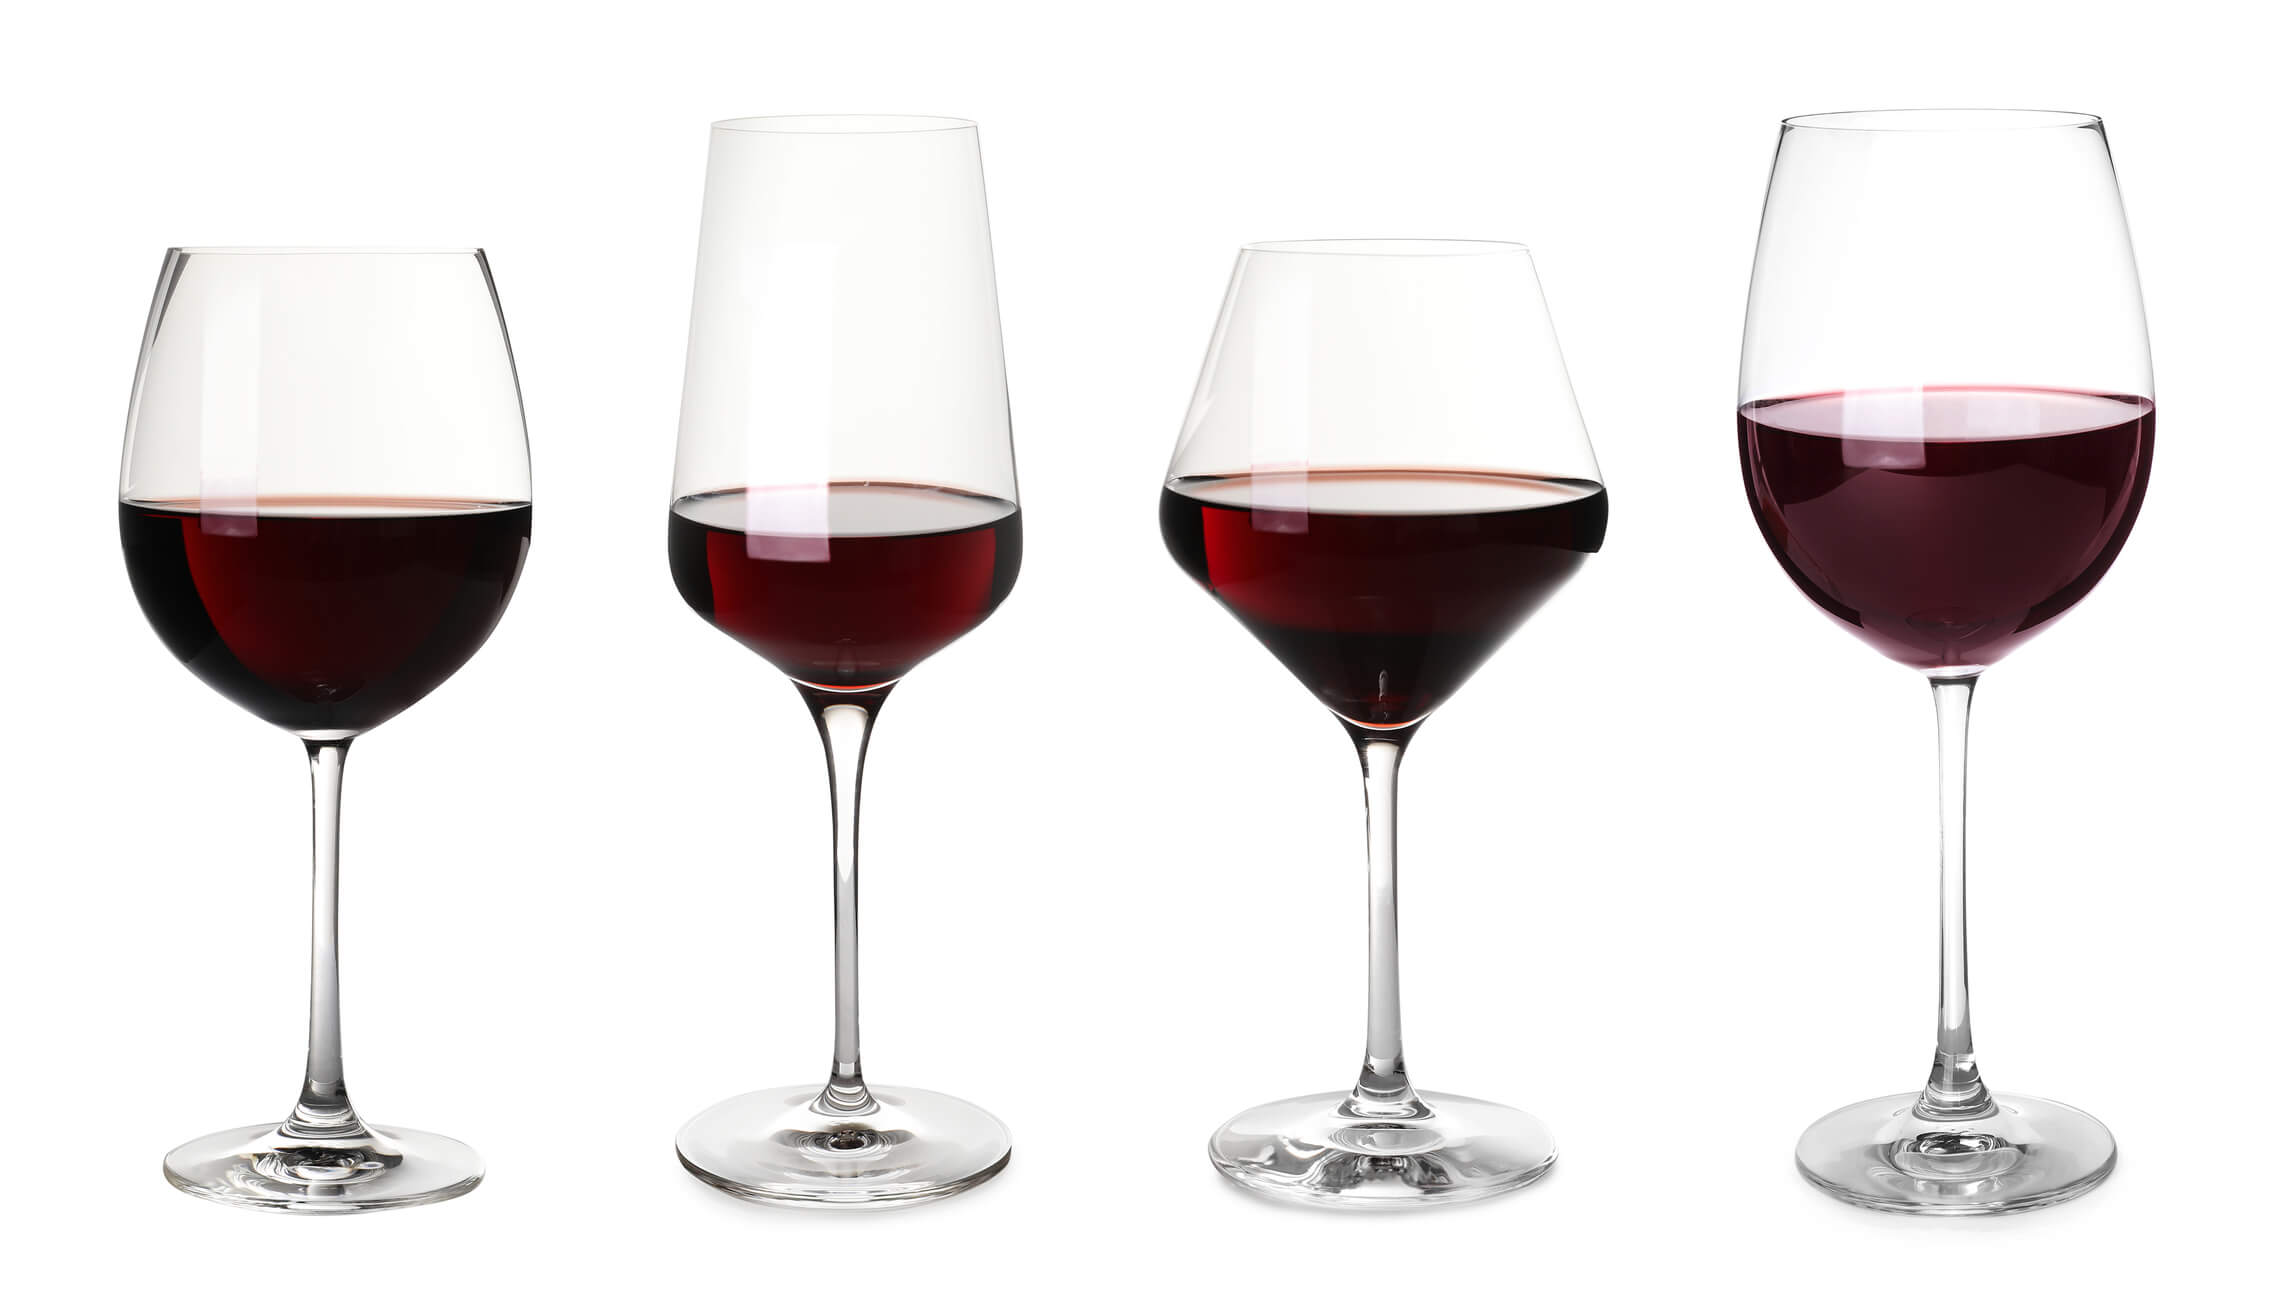 Four glasses of red wine in glasses of different shapes and styles neatly lined up against a white background